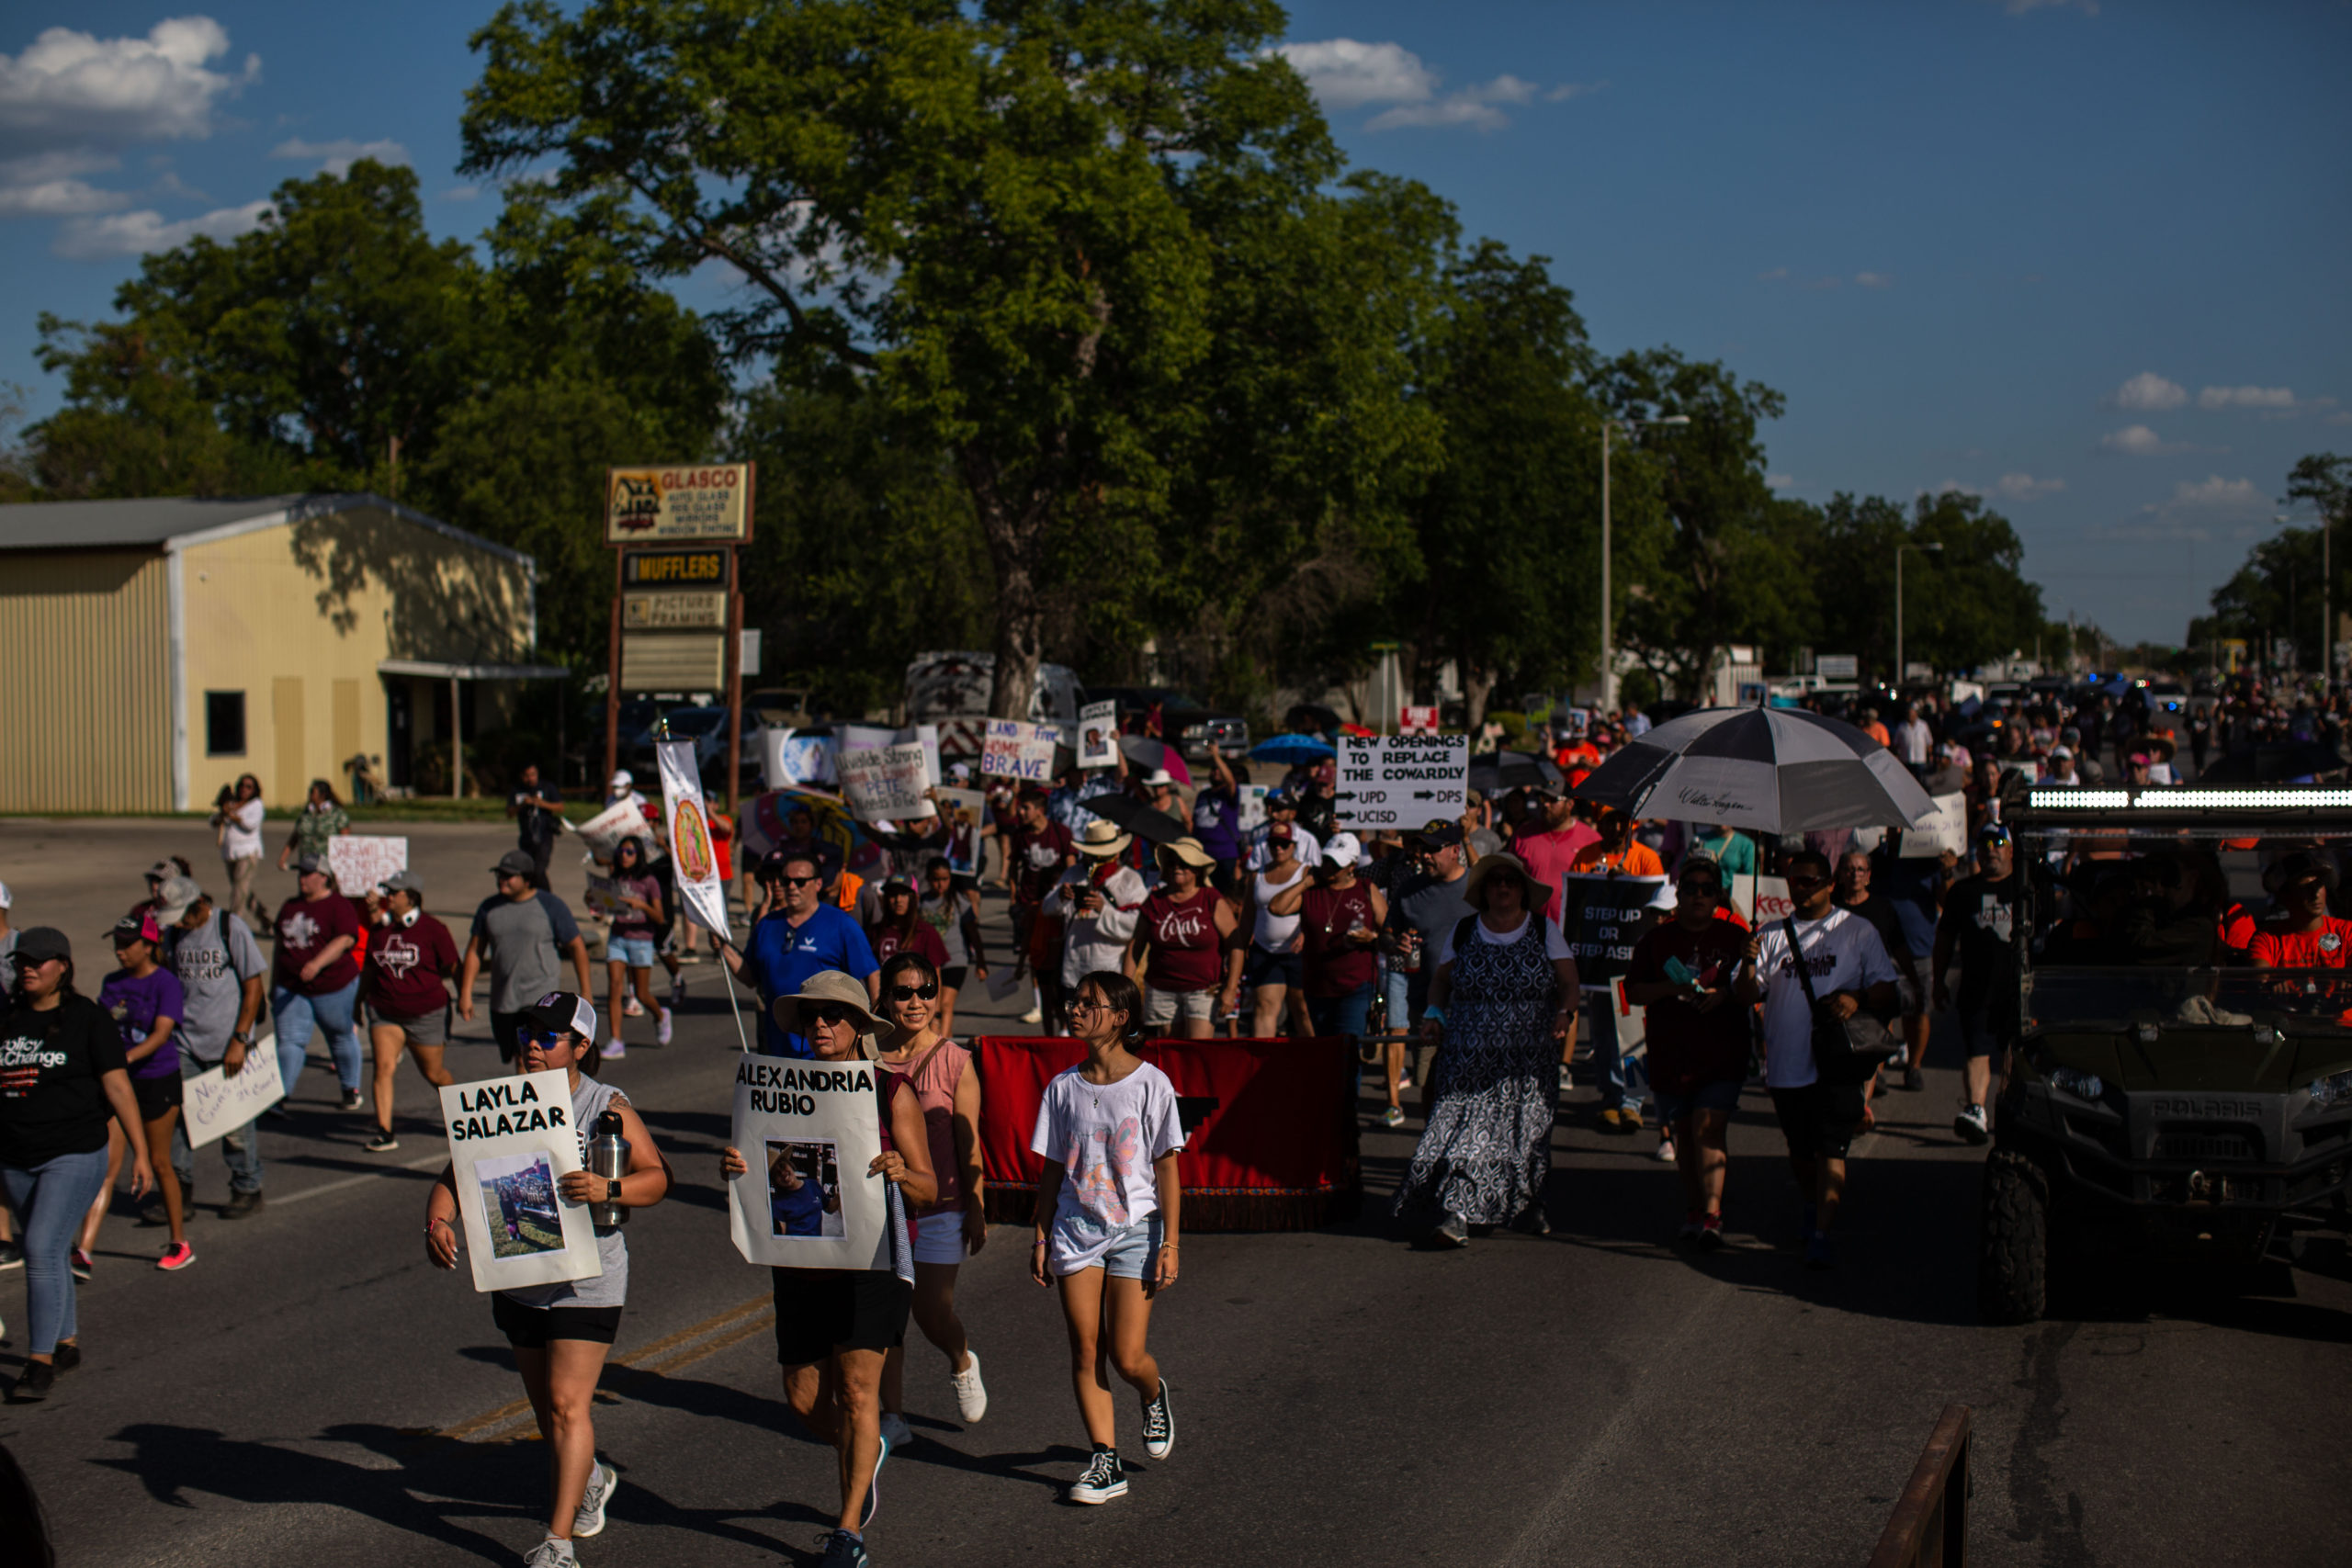 Hundreds of people march through the Uvalde streets under the hot Texas sun. In the lead are relatives of the victims, holding signs with their names and photos.